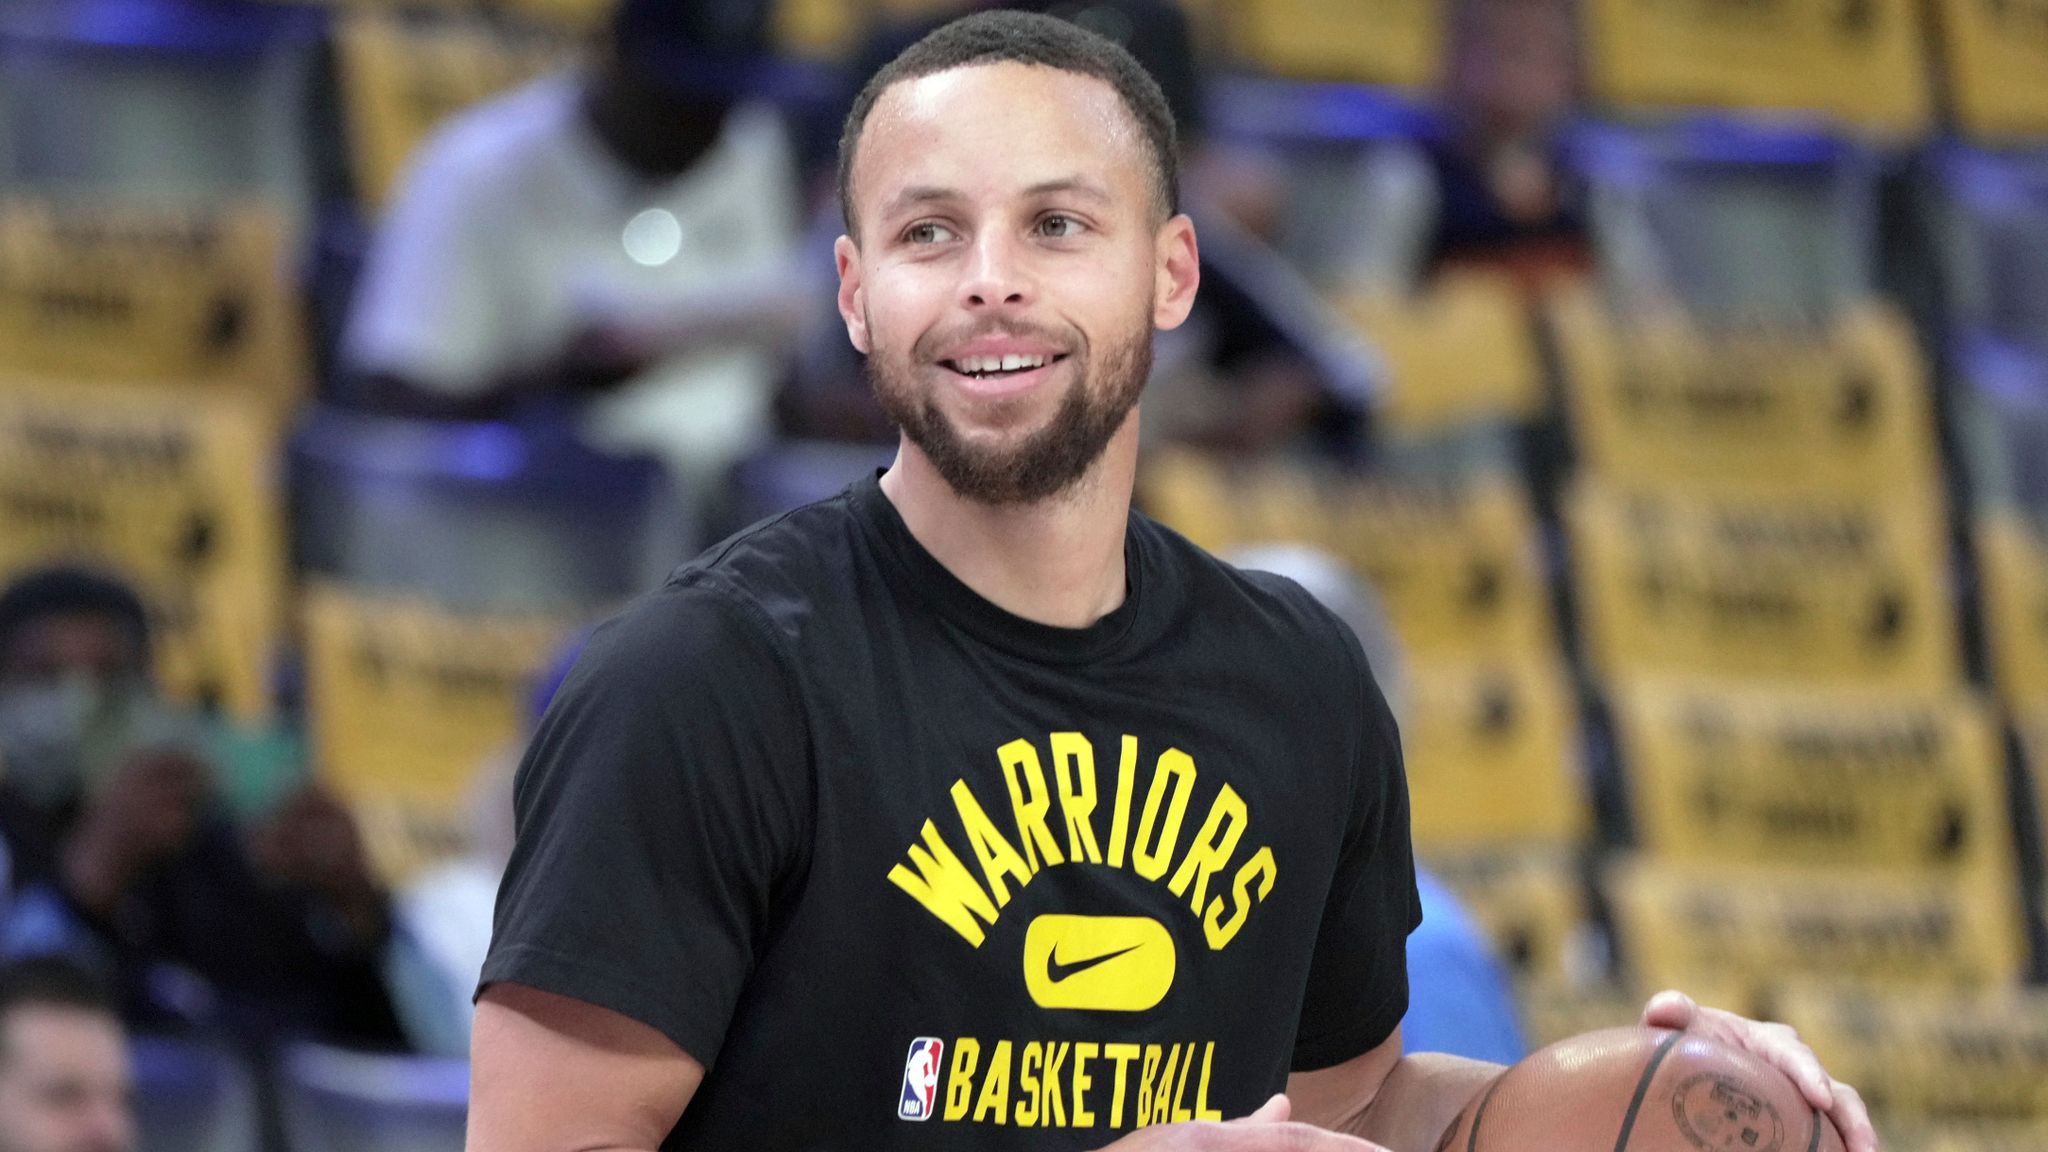 NBA MVP and Golden State Warriors star Stephen Curry aiming to